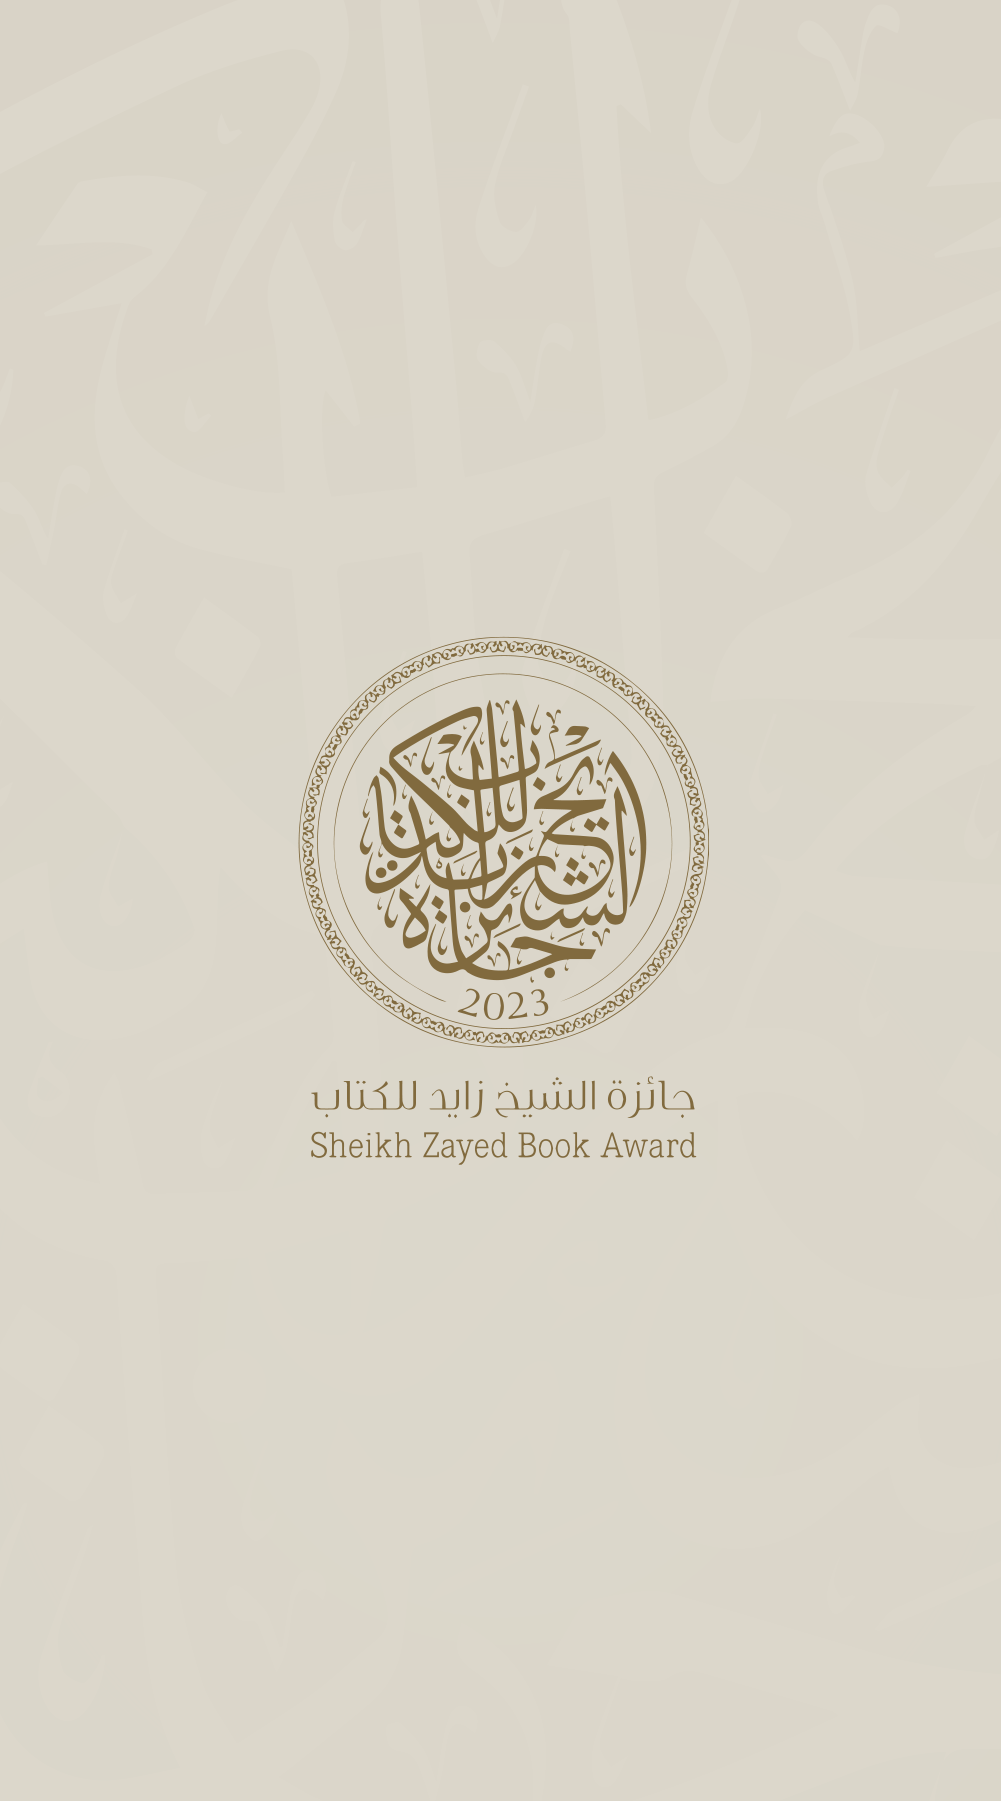 18th Sheikh Zayed Book Award Reveals Longlists for Literature, Young Author, Children’s Literature, and Editing of Arabic Manuscripts Categories